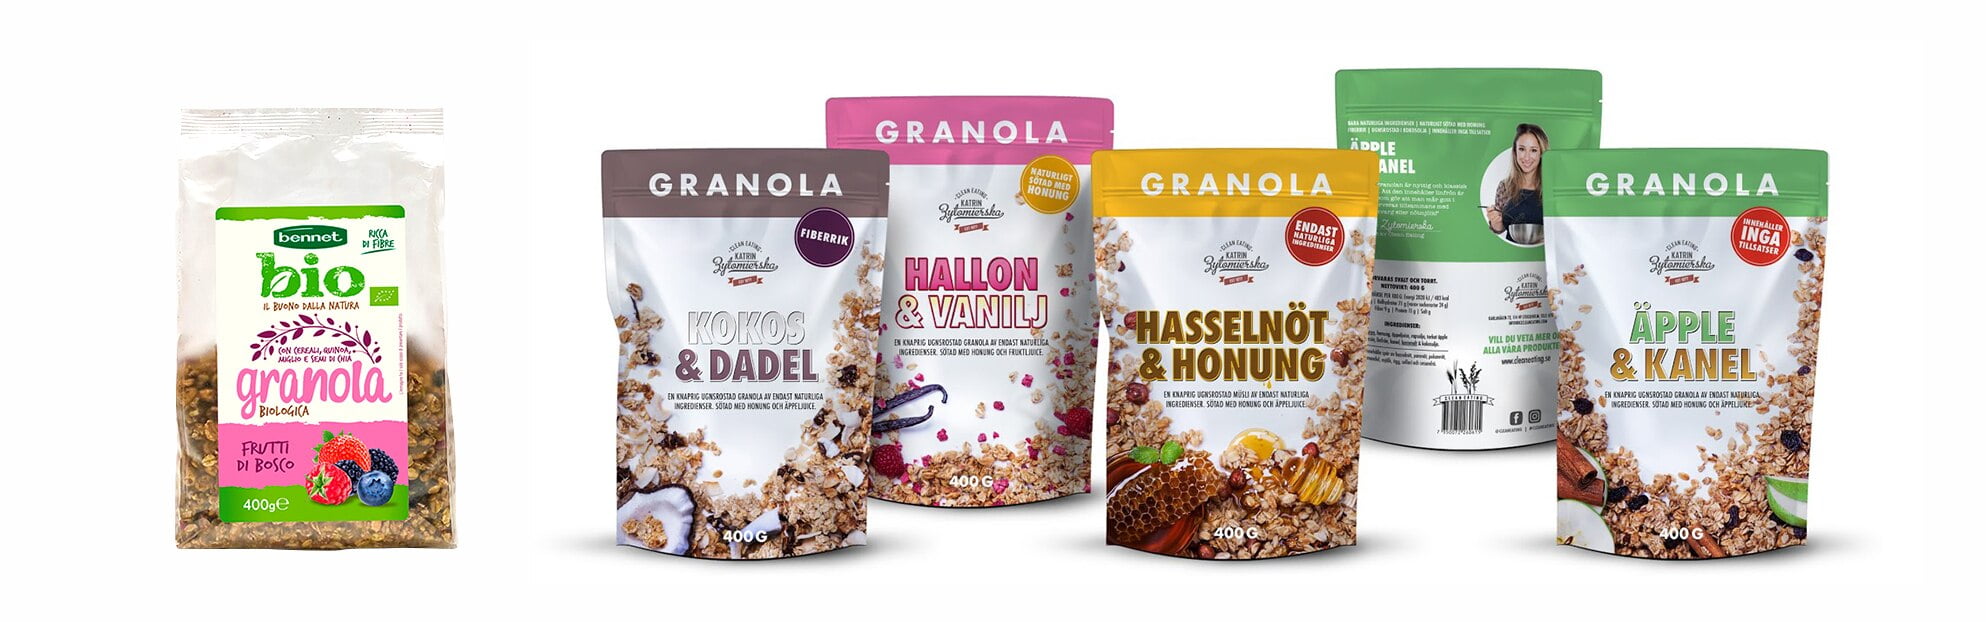 matte-finish-granolas-and-cereals-box-bottom-bags-and-stand-up-pouches.jpg